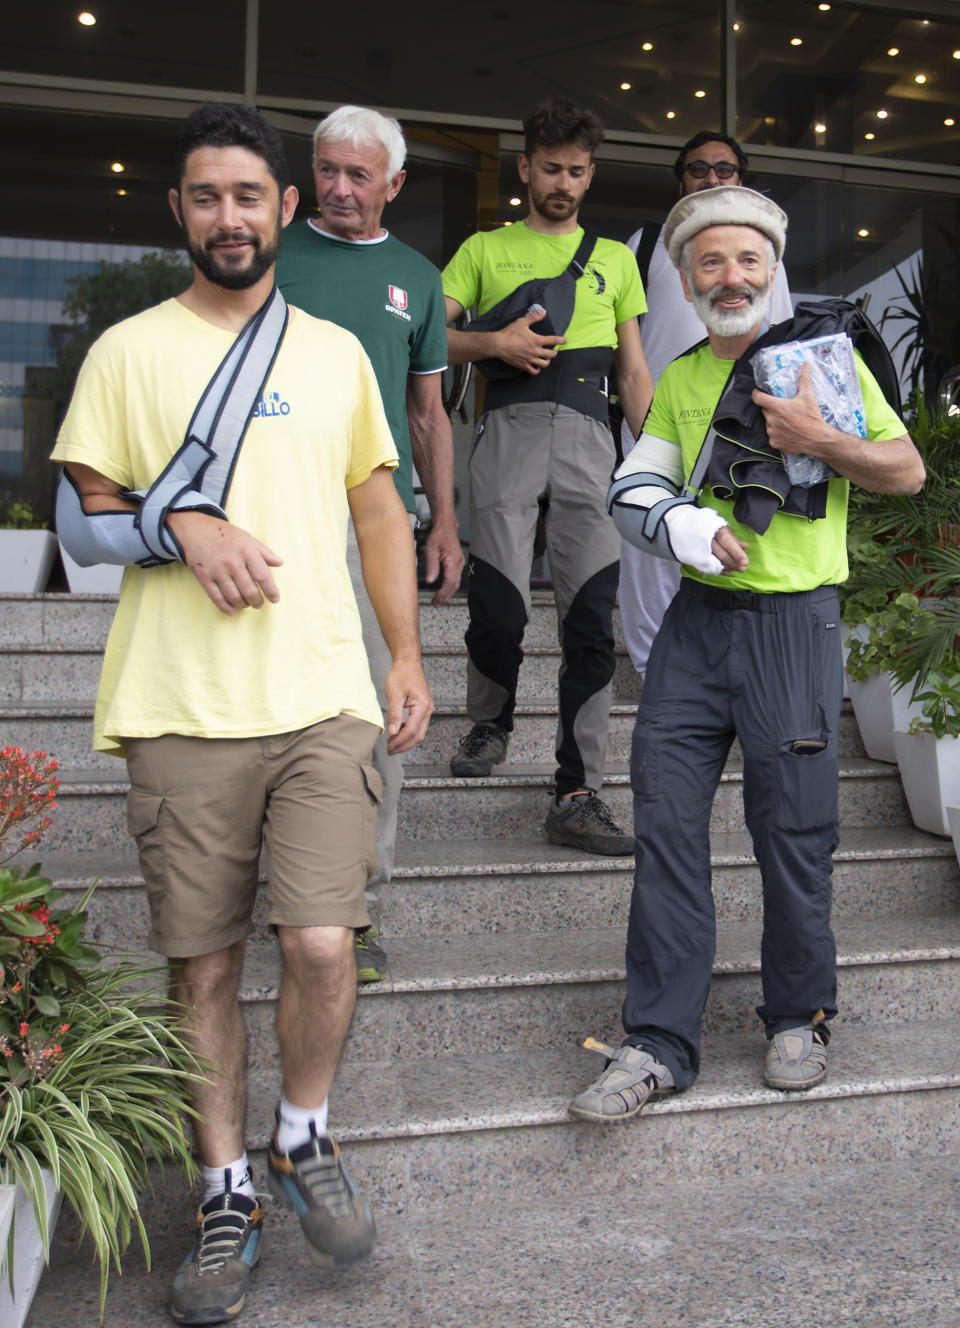 The team leader, Tarcisio Bellò, 57, right, leaves a hotel with his colleagues to see the Italian ambassador in Islamabad, Pakistan, Thursday, June 20, 2019. The renowned Italian mountaineer, who narrowly survived along-with six other members of an expedition on a mountain, burst into tears Thursday when he recalled how helplessly he saw one of his Pakistani colleagues being swept away by an avalanche that struck them at an altitude of around 5,300 meters (17,390 feet) earlier this week. (AP Photo/B.K. Bangash)